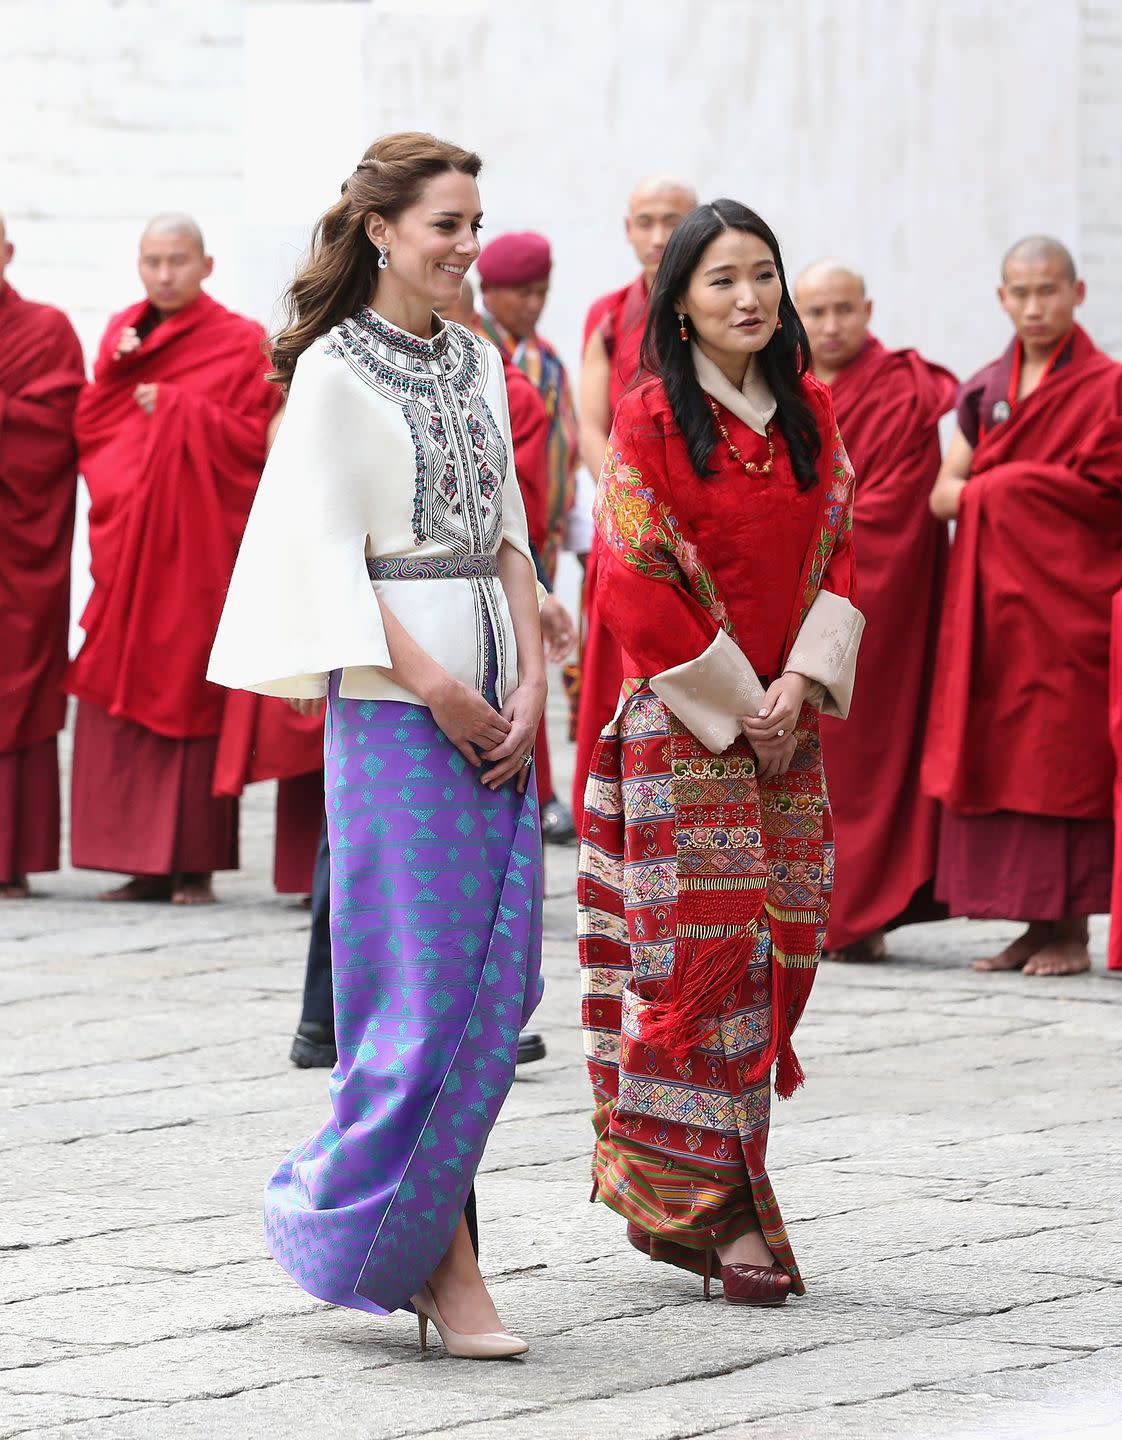 thimphu, bhutan april 14 catherine, duchess of cambridge walks with hm jetsun pema wangchuck in front of monks in the tashichhodzong fortress on the first day of a two day visit to bhutan on the 14th april 2016 in paro, bhutan the royal couple are visiting bhutan as part of a week long visit to india and bhutan that has taken in cities such as mumbai, delhi, kaziranga, bhutan and agra photo by chris jacksongetty images